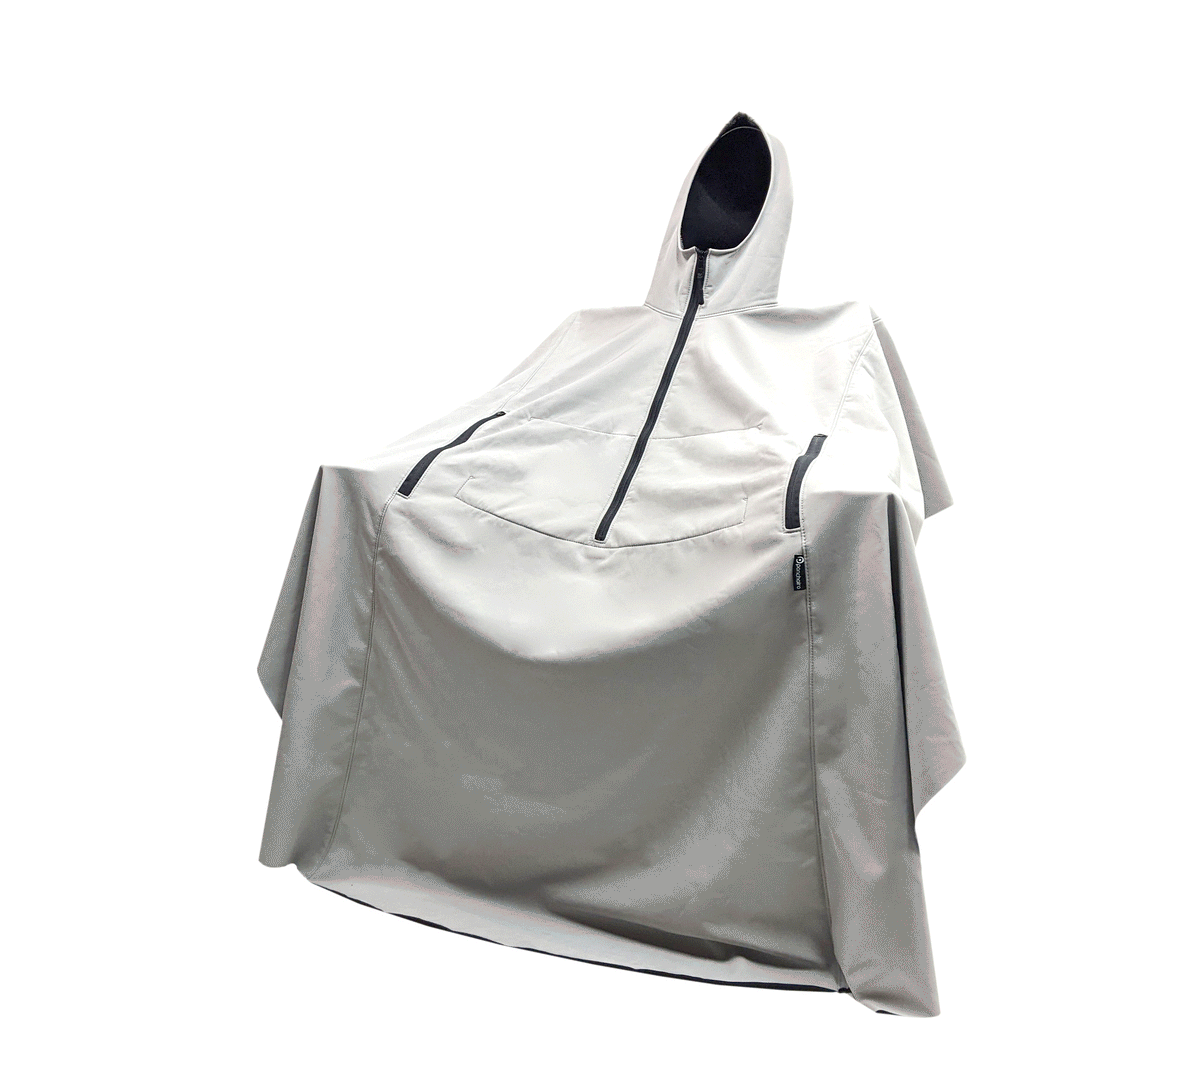 Ponchairo™ is the poncho blanket that easily slips on and off folding, collapsible and stadium chairs. 